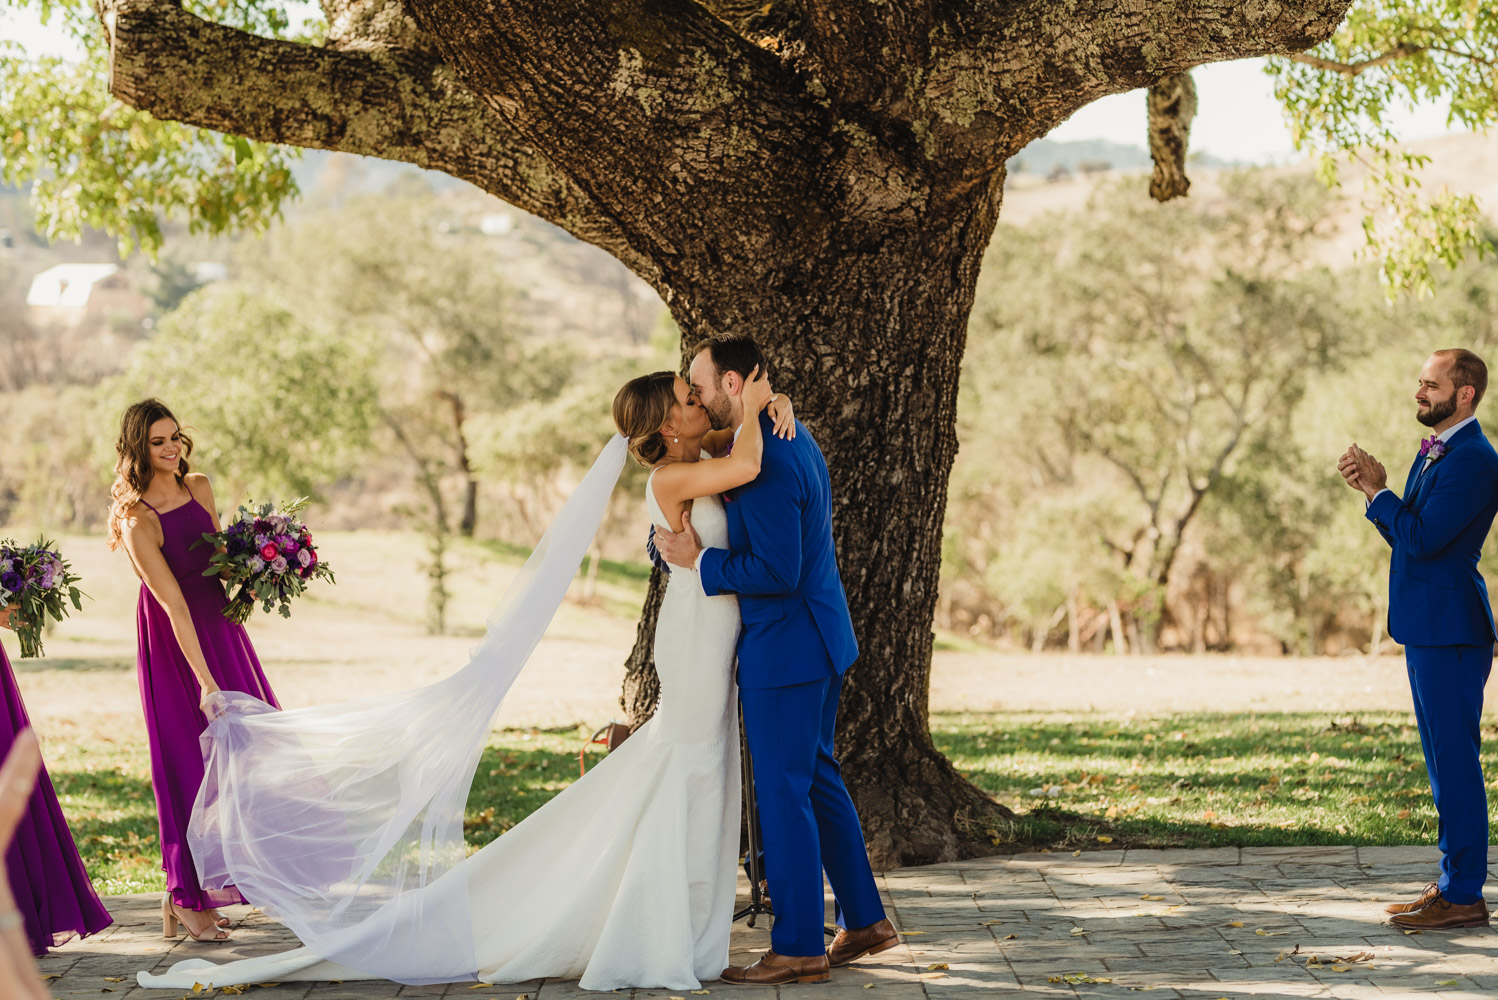 Triple S Ranch Wedding Venue, first kiss during the ceremony photo